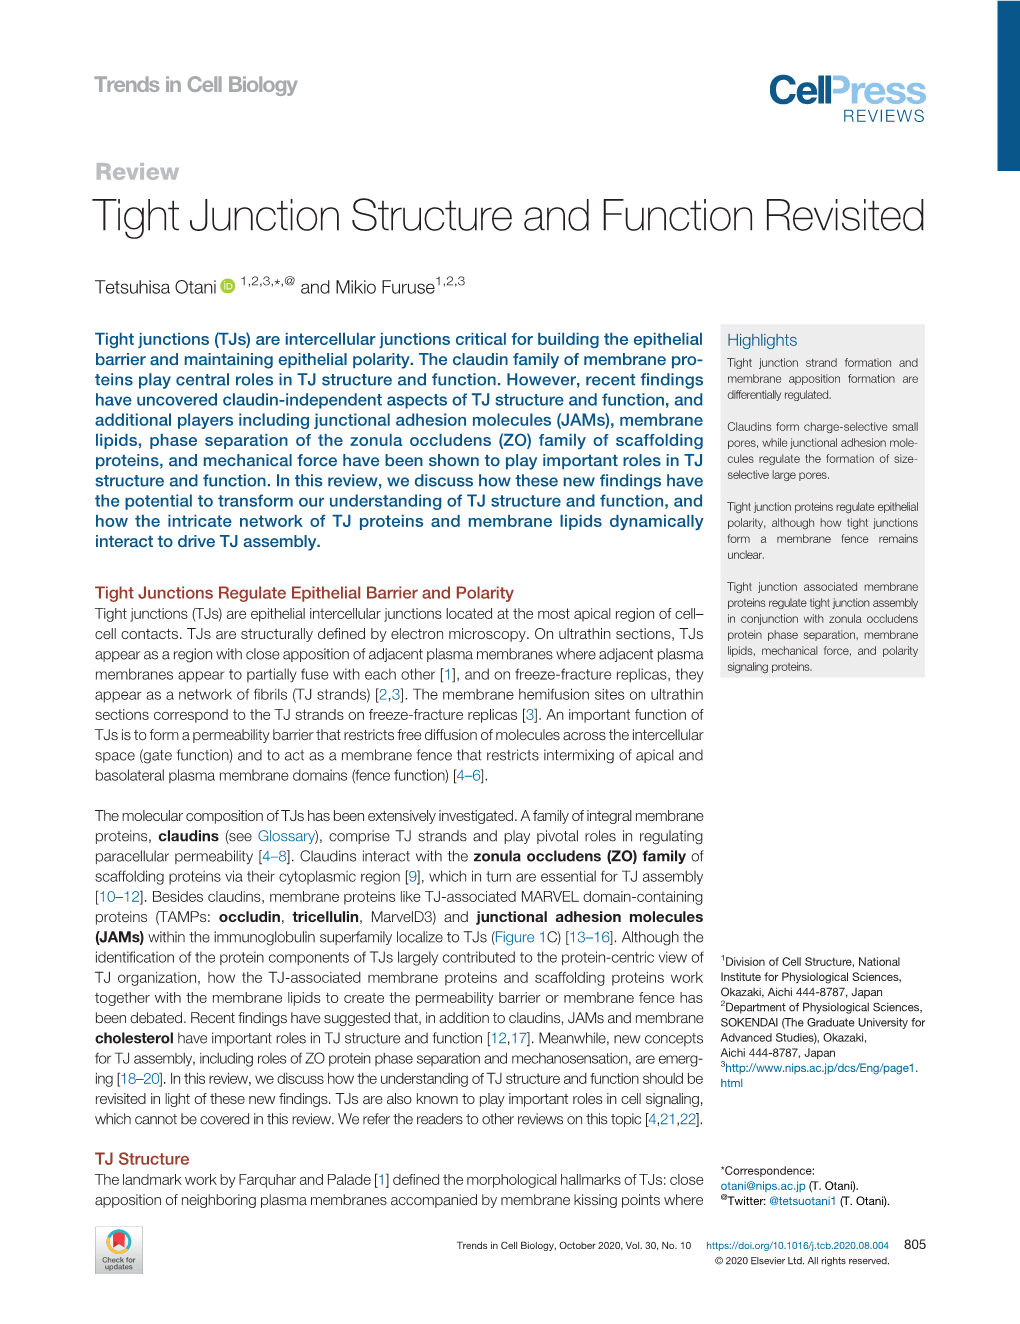 Tight Junction Structure and Function Revisited